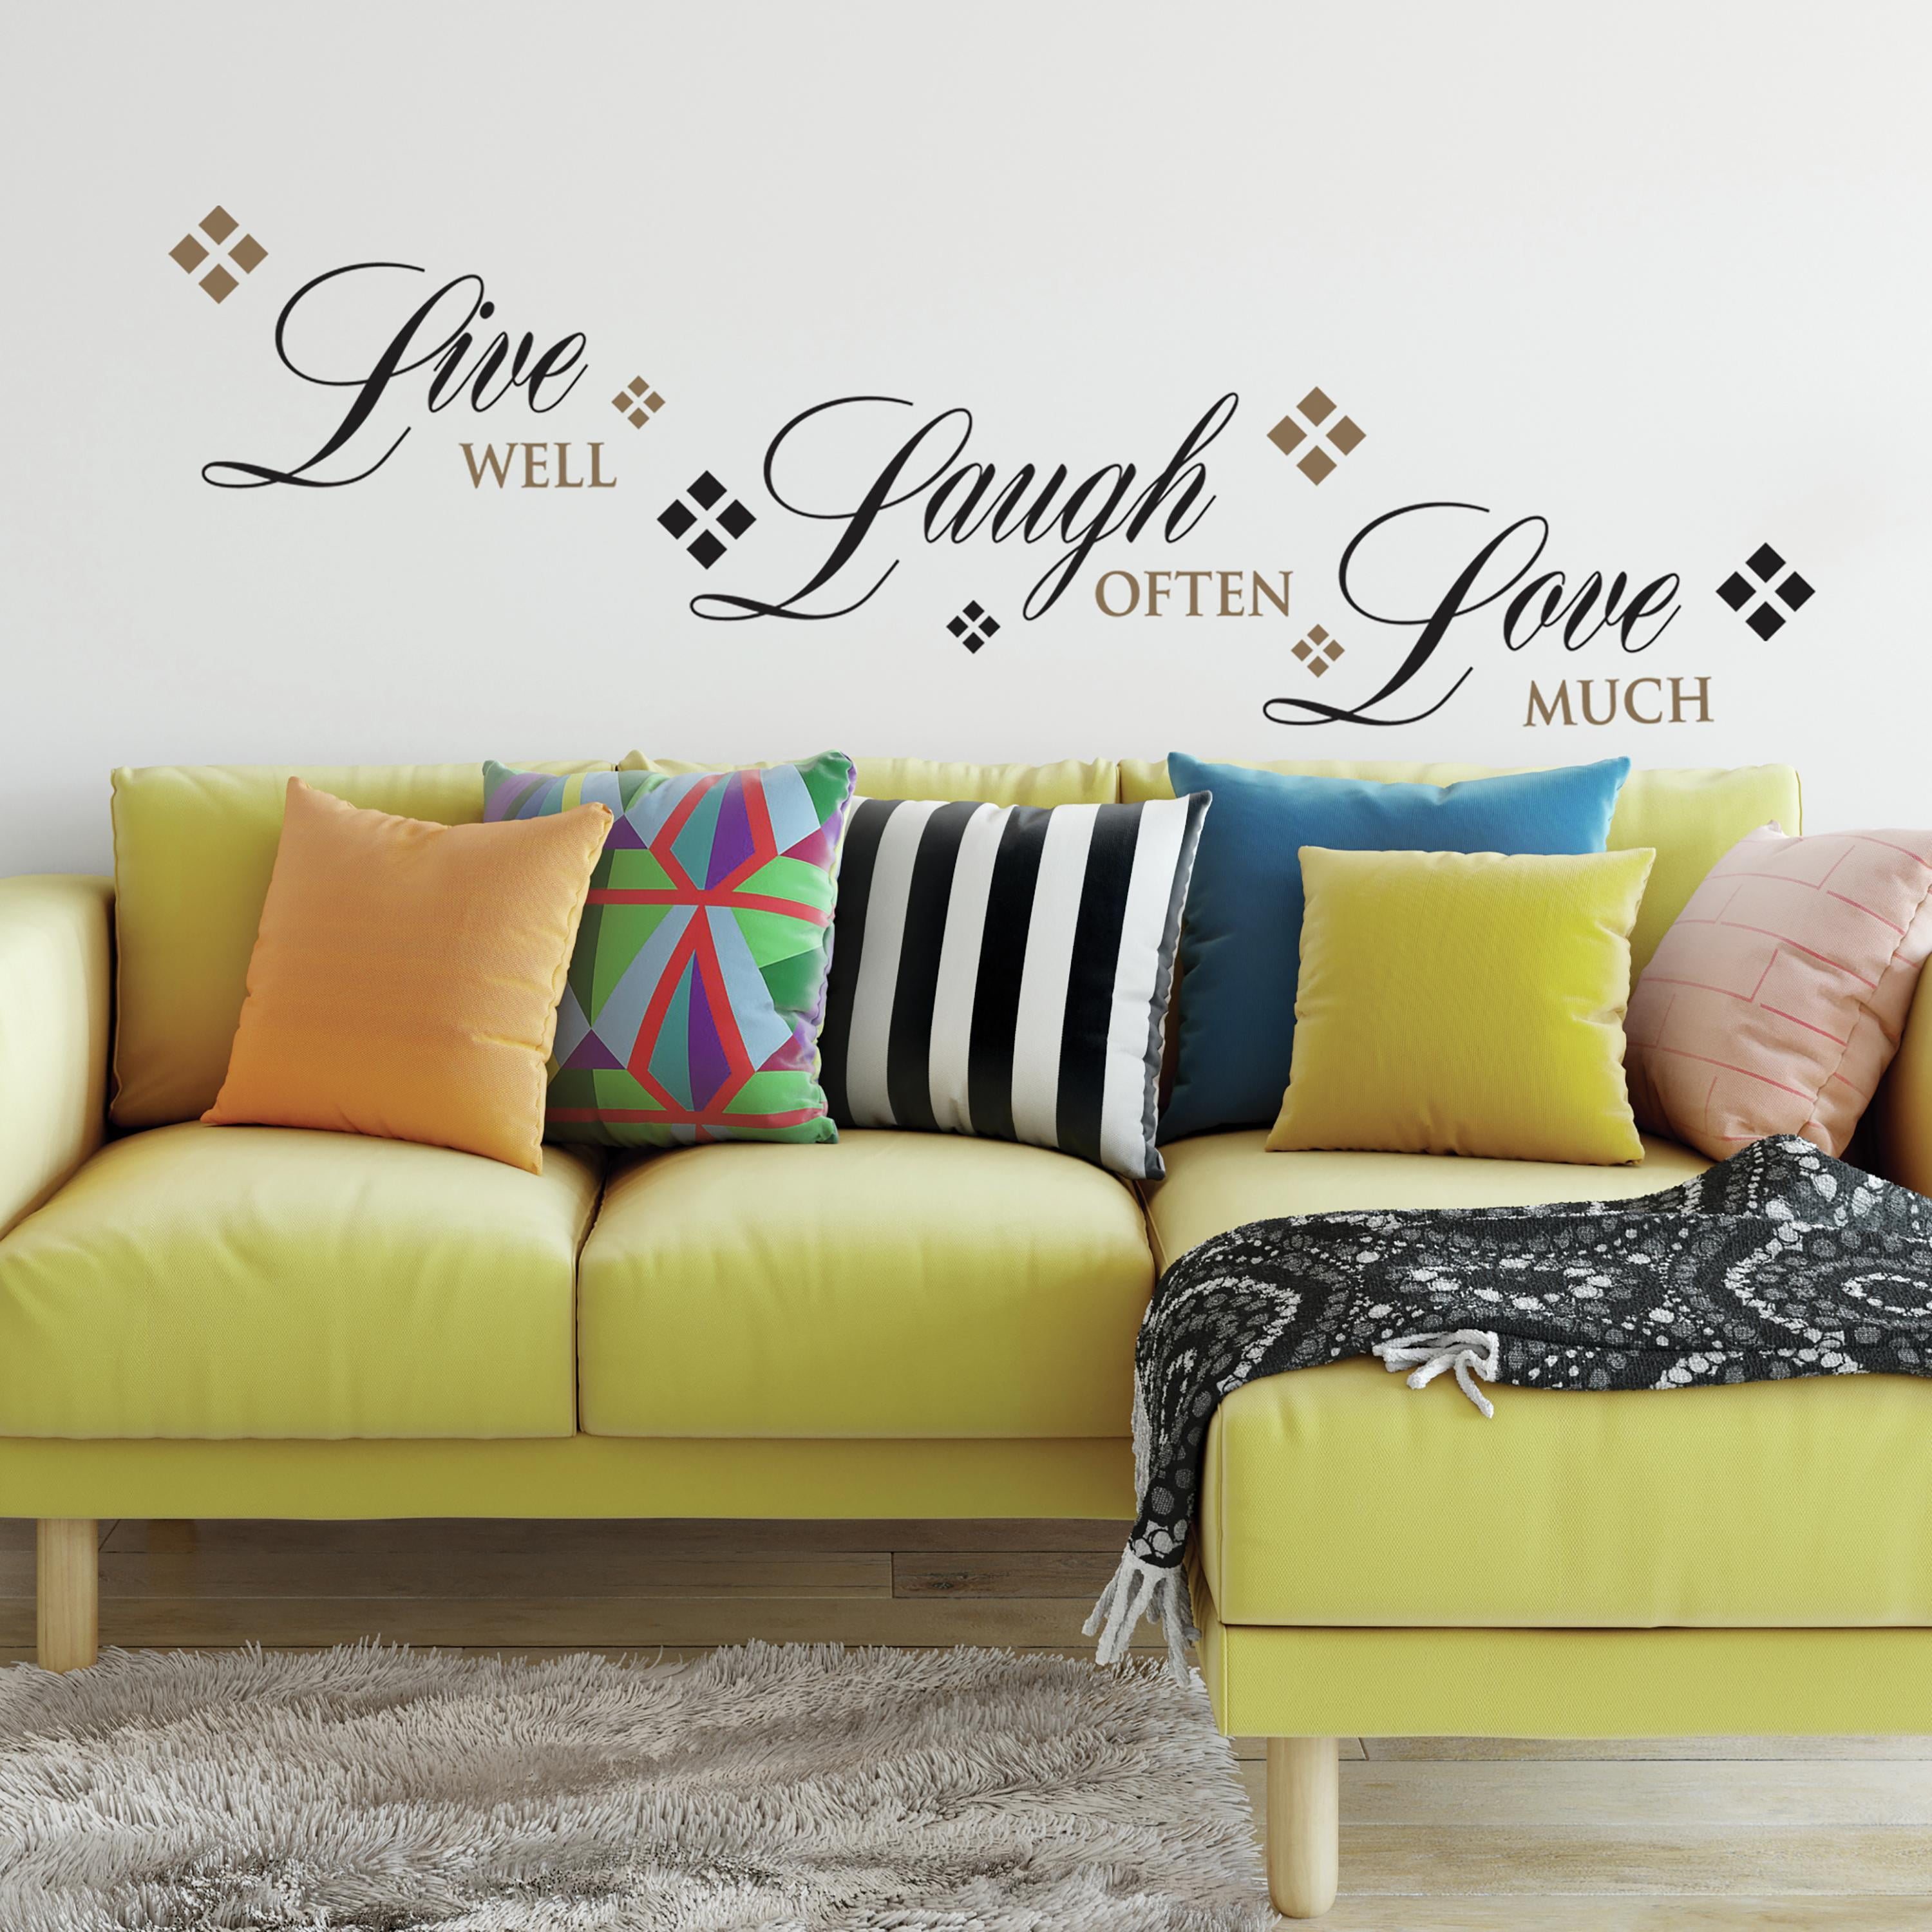 LIVE LAUGH LOVE Quote Vinyl Decal Removable Art Wall Stickers Home Room Decor WT 